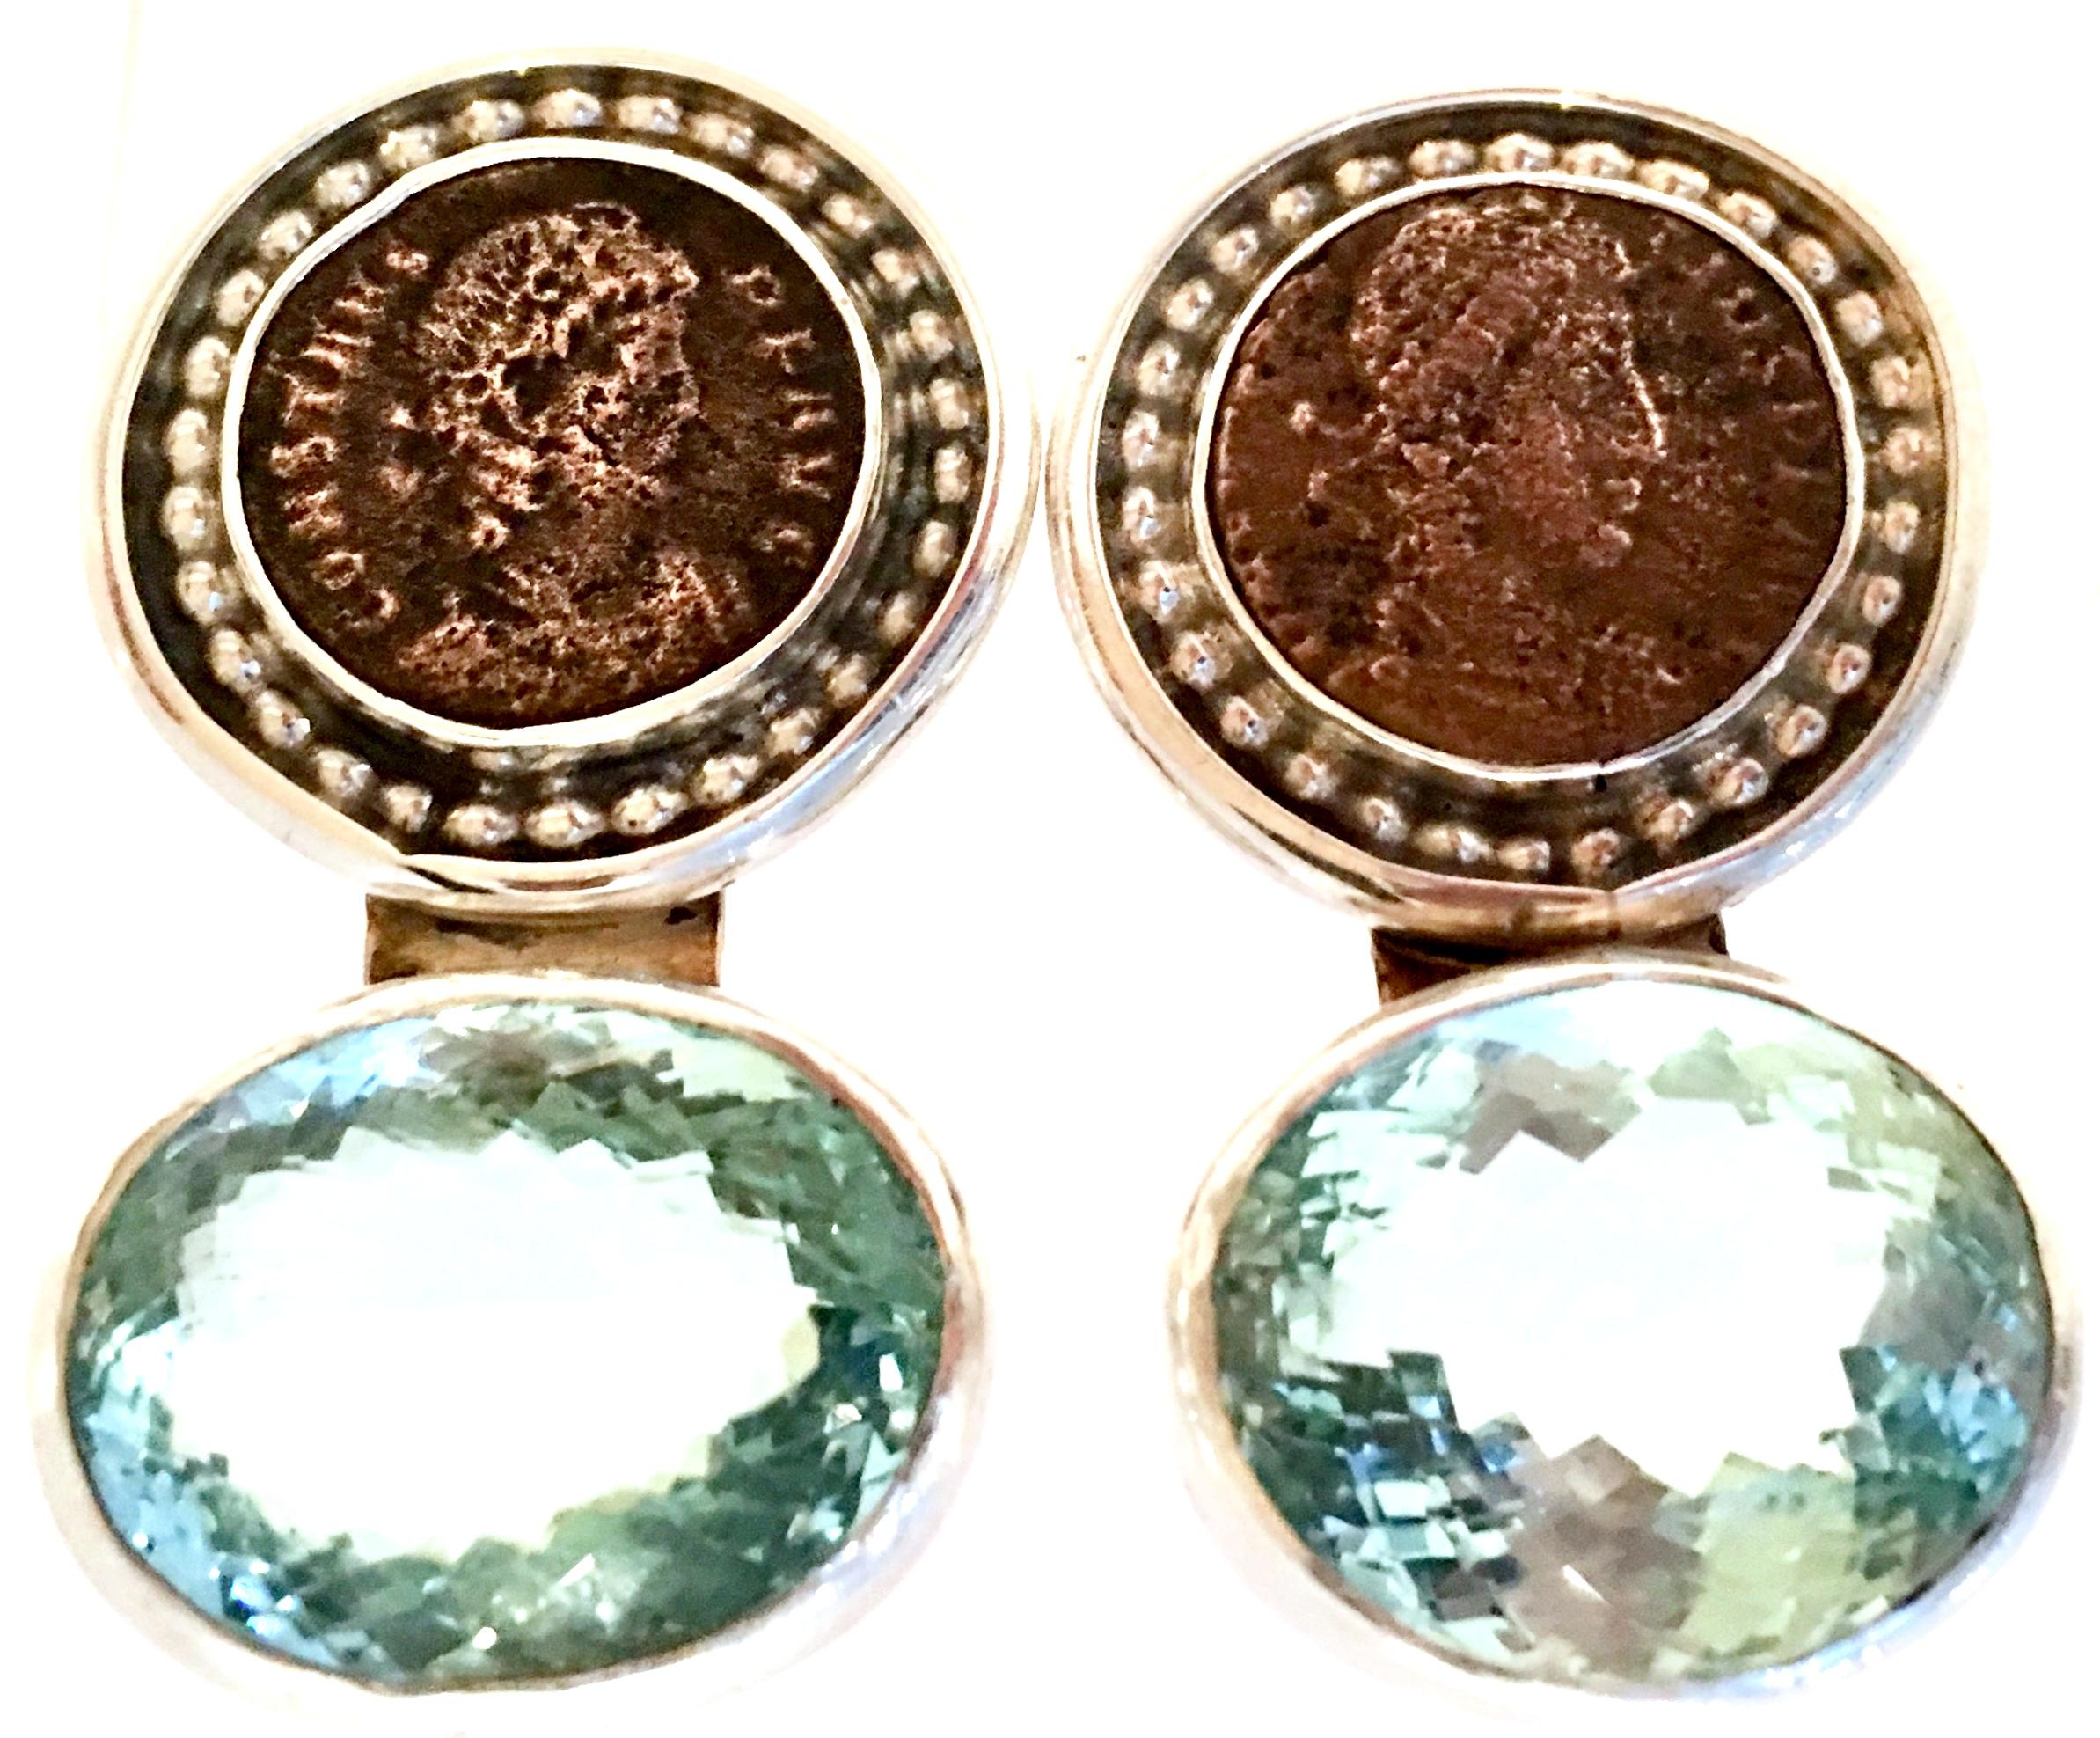 20th Century 925 Sterling Silver & Aquamarine, Bronze Roman Coin Clip On Earrings By, Rebecca Collins. These iconic Rebecca Collins Design Bronze Roman Coin, Brilliant Cut and Faceted Aquamarine stone earrings are set in 925 sterling silver. Each